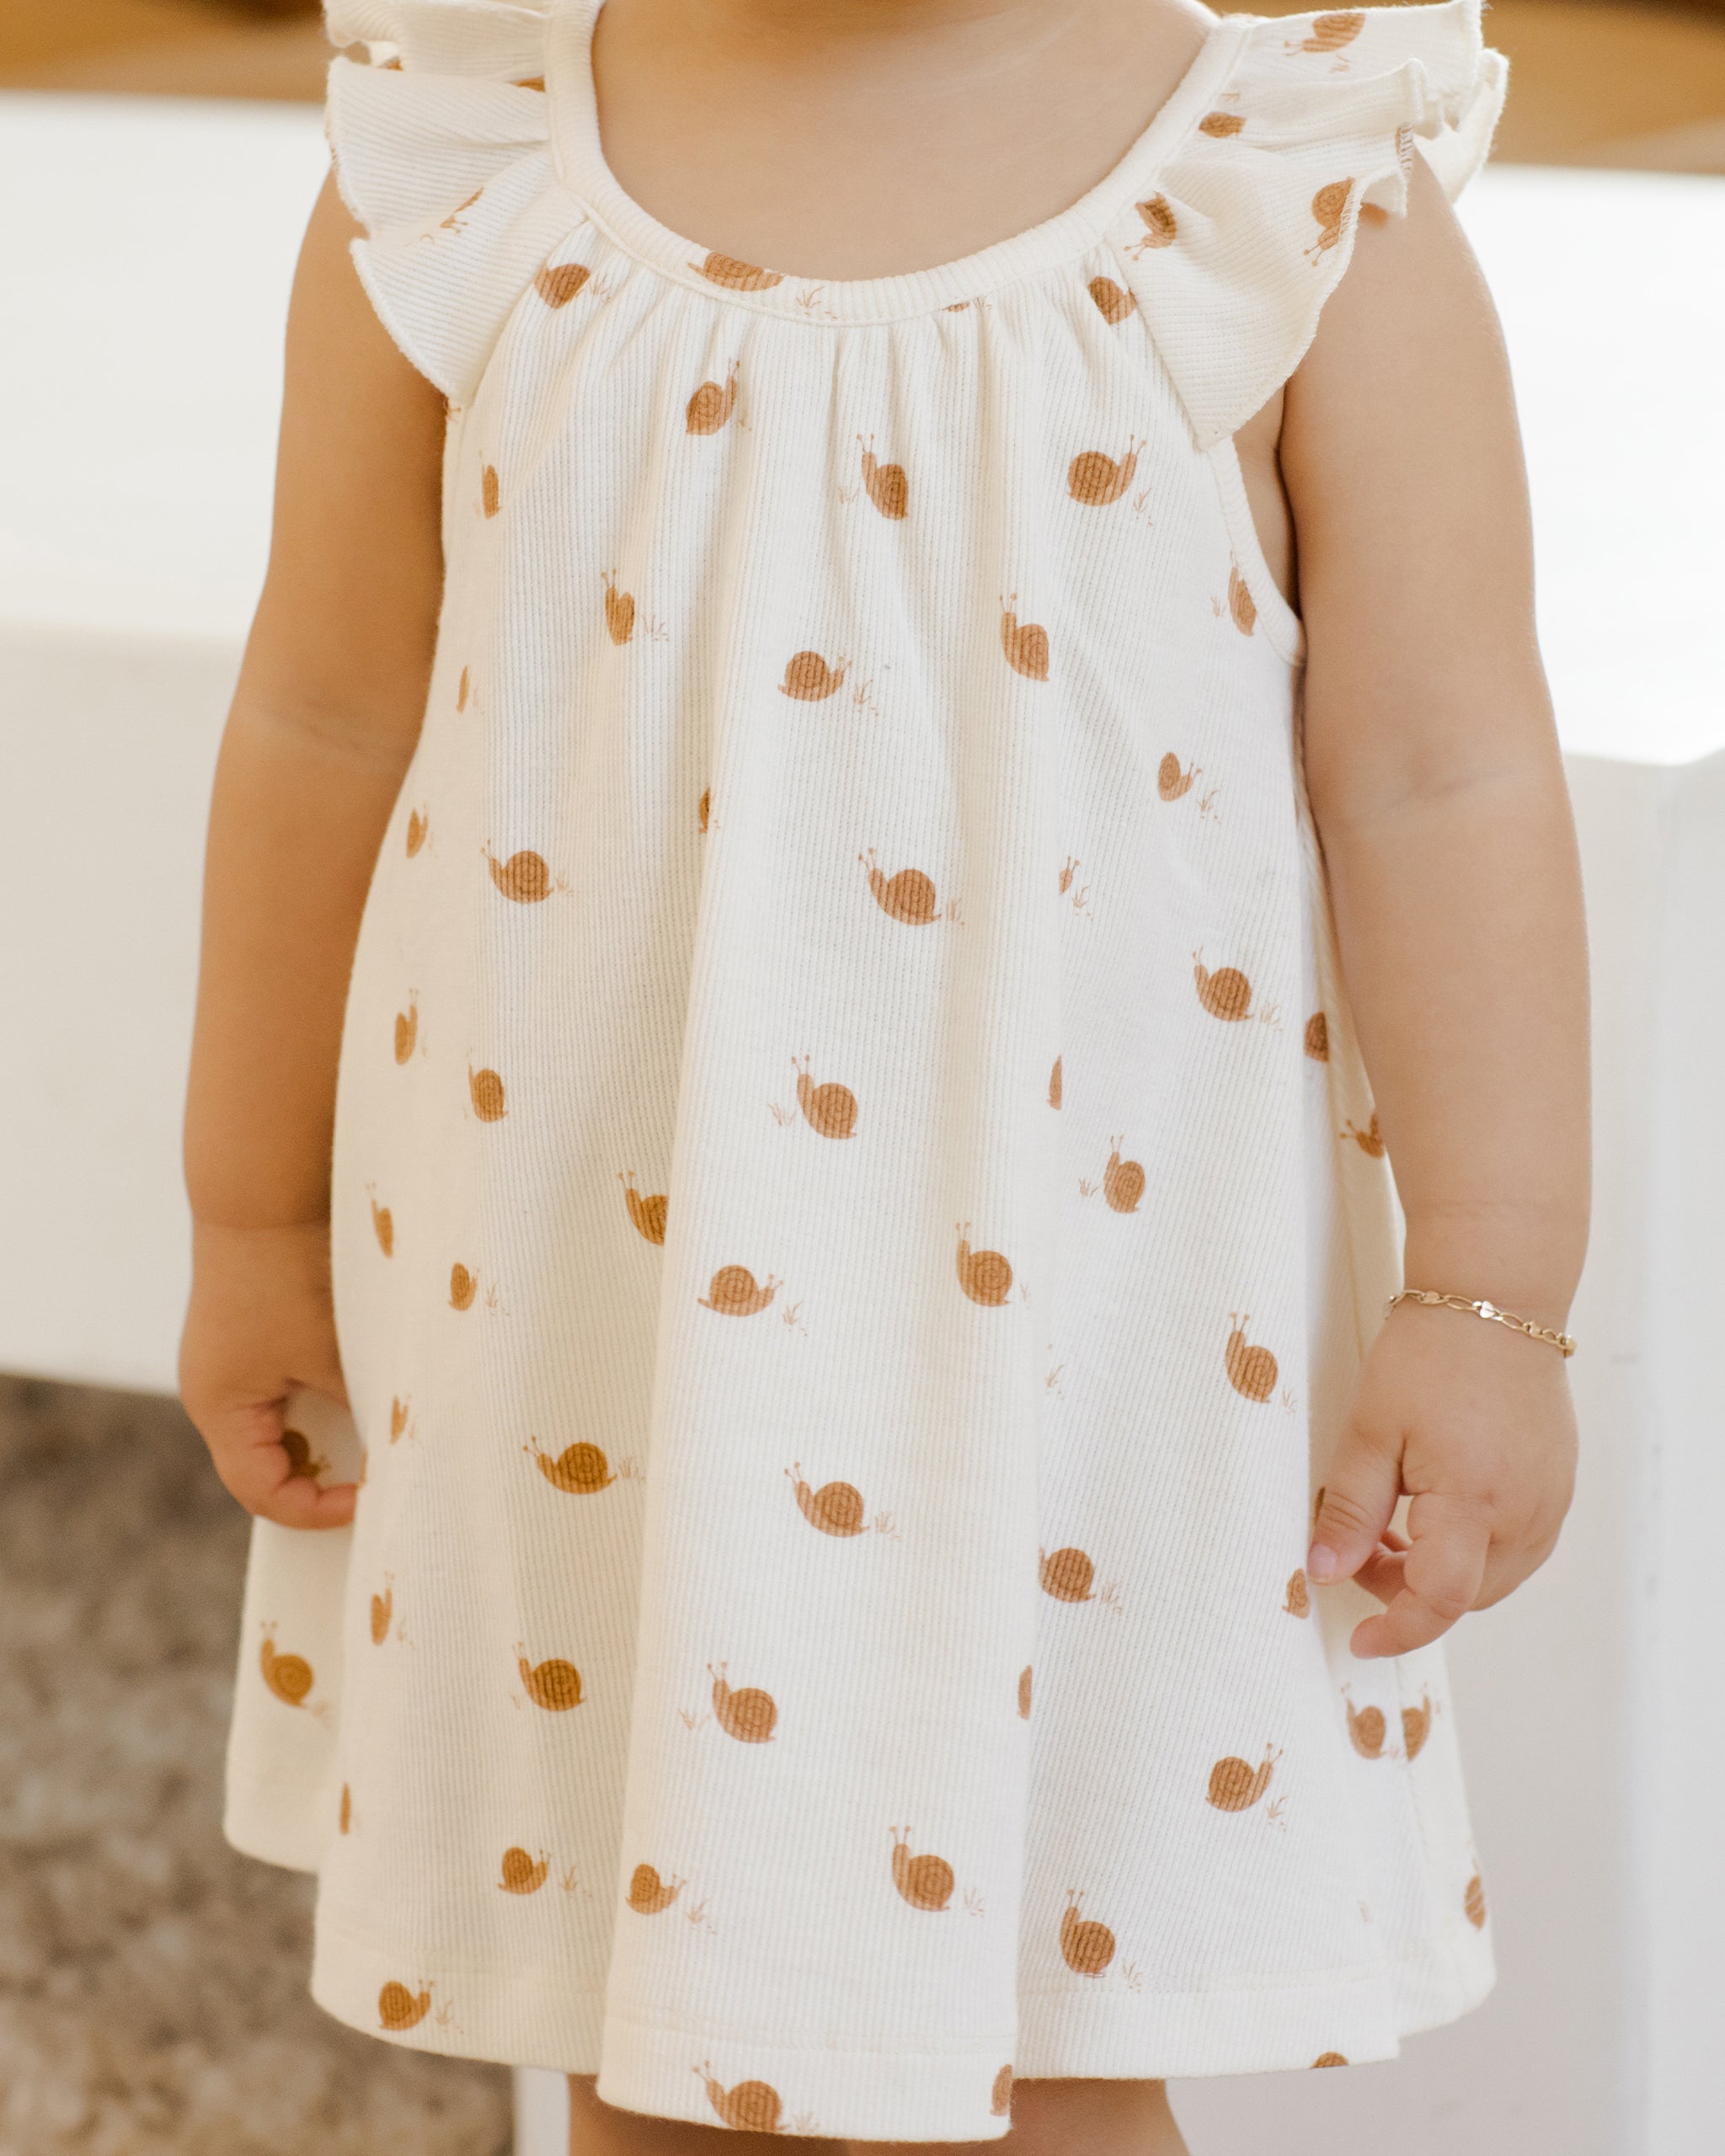 Ruffle Swing Dress || Snails - Rylee + Cru | Kids Clothes | Trendy Baby Clothes | Modern Infant Outfits |